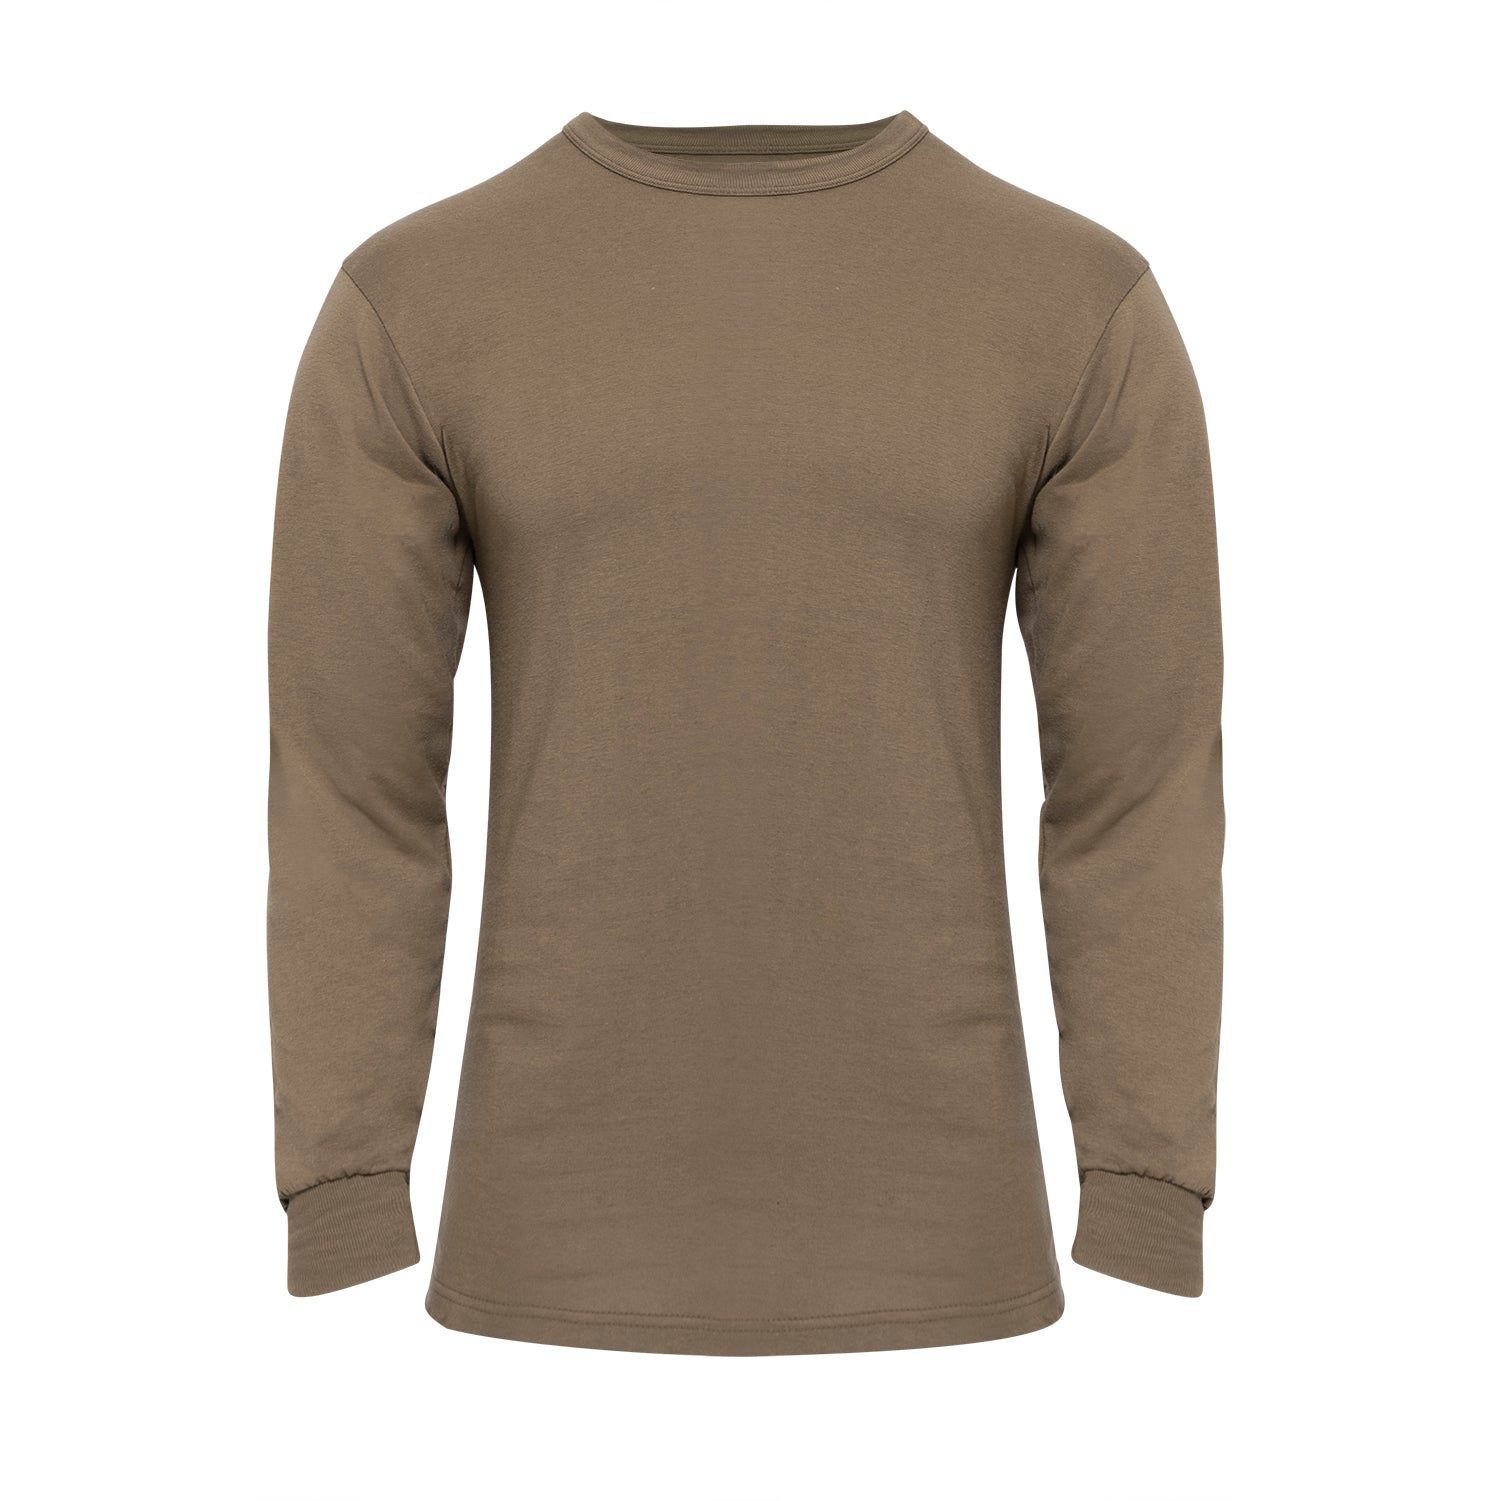 [AR 670-1][Military] Poly/Cotton Long Sleeve Shirts Brown